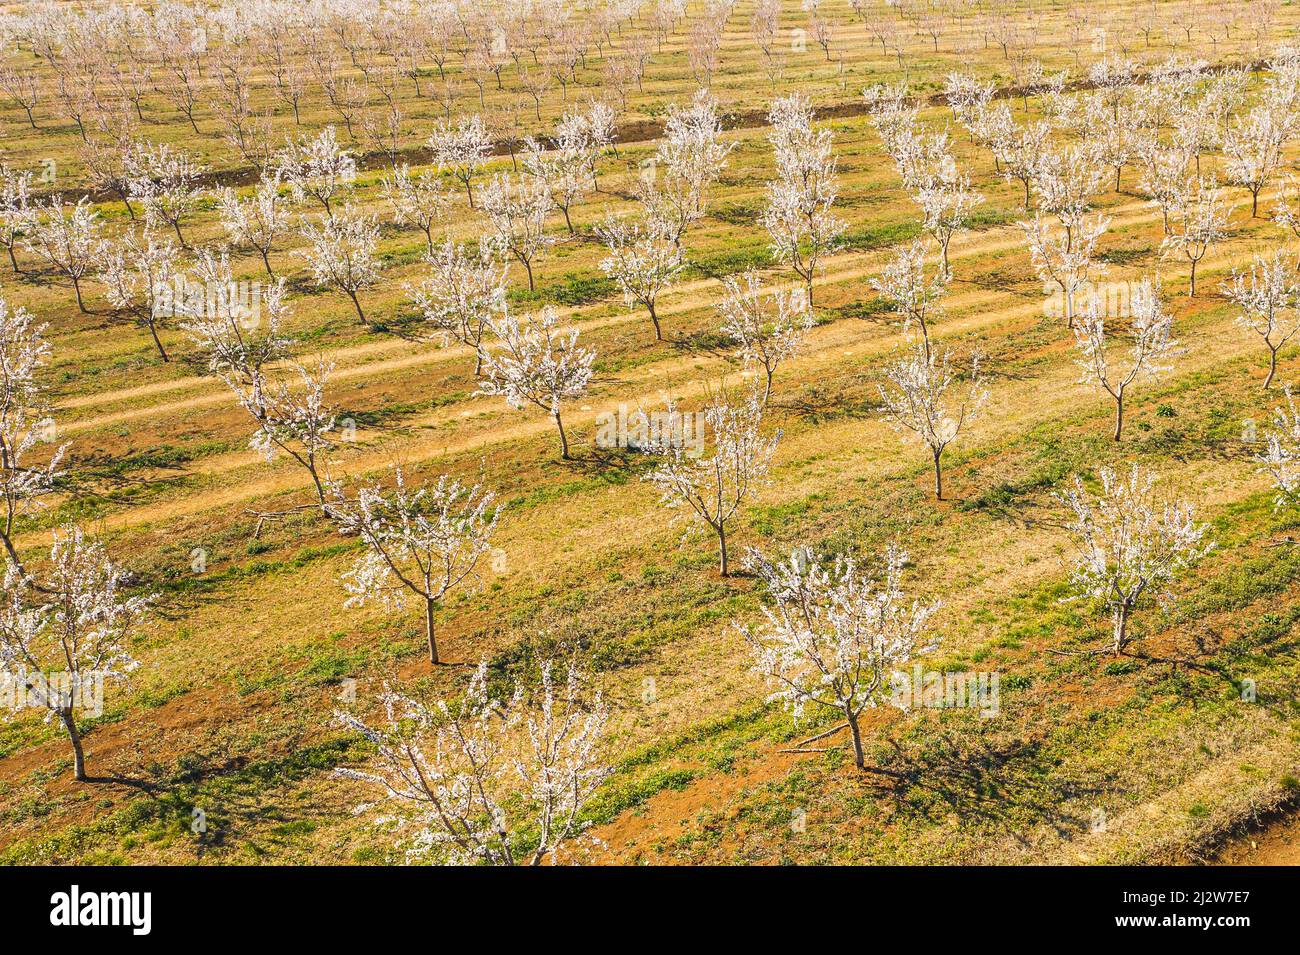 Long alley of almond trees blossom on an almonds plantation, view from drone Stock Photo